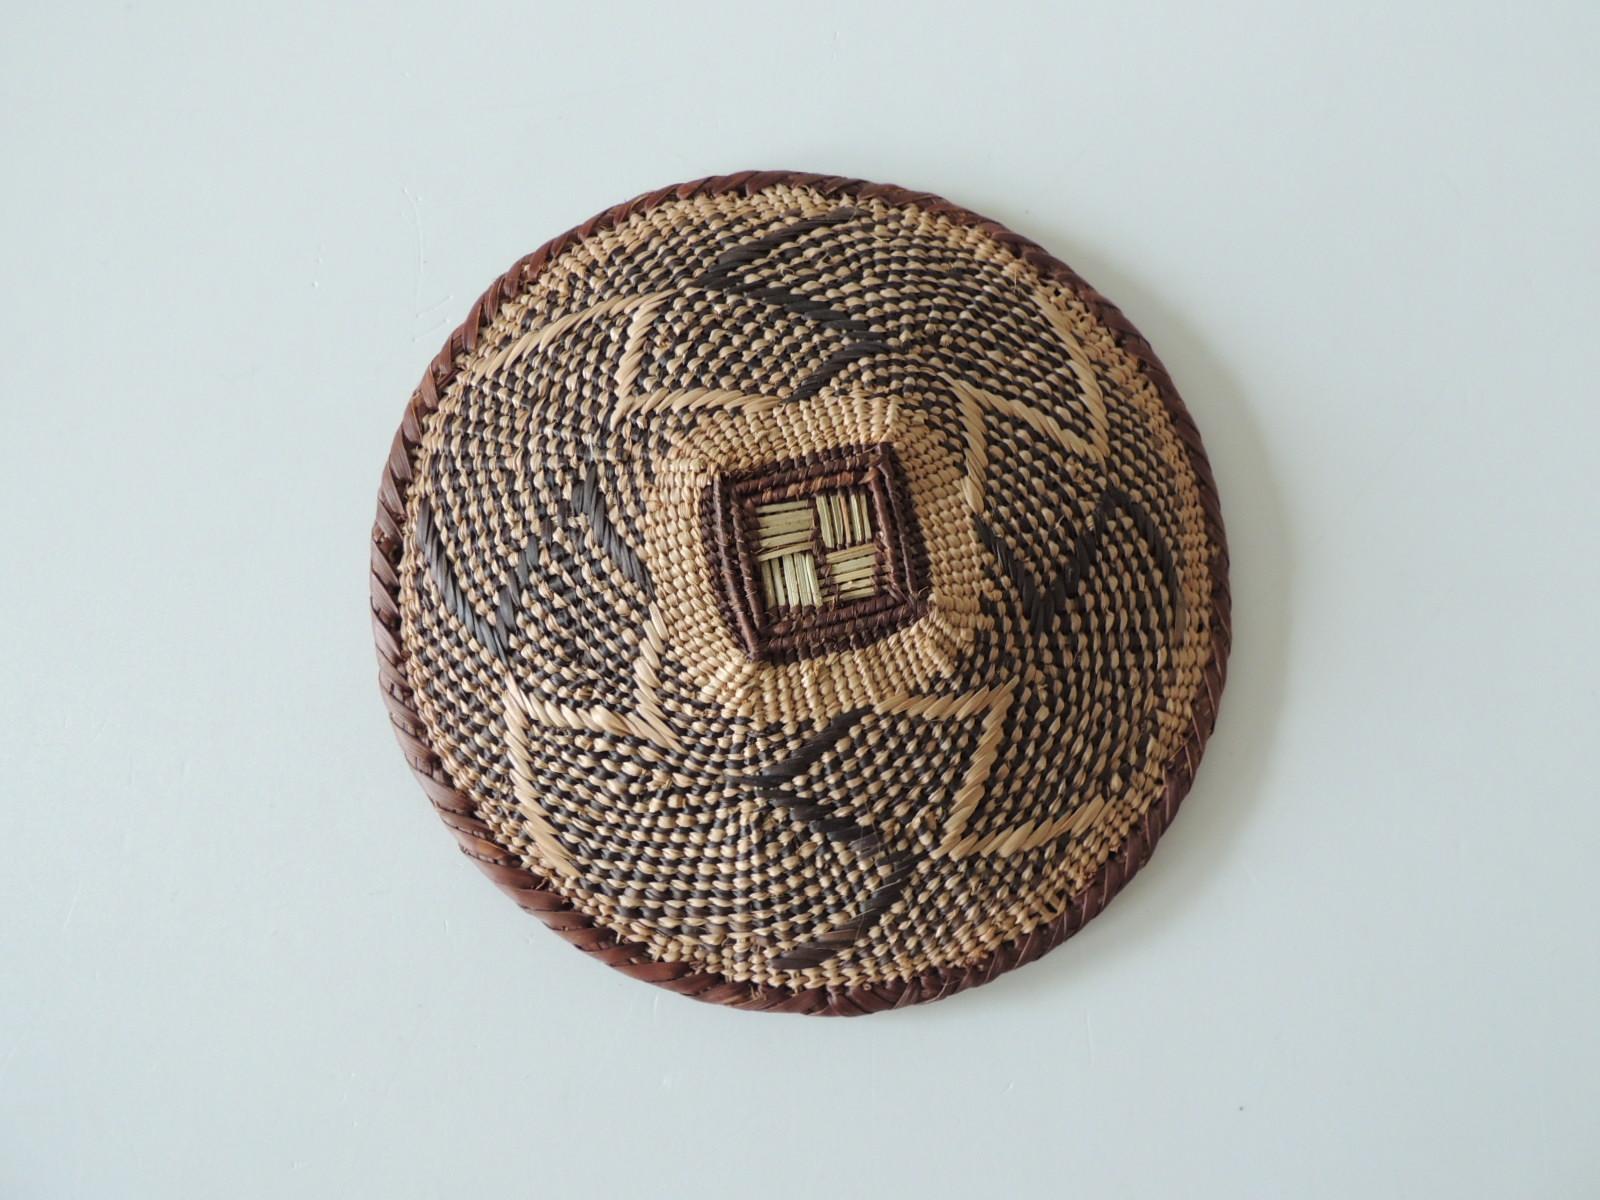 Hand-Crafted Vintage Natural Fiber Artisanal Small Round African Basket